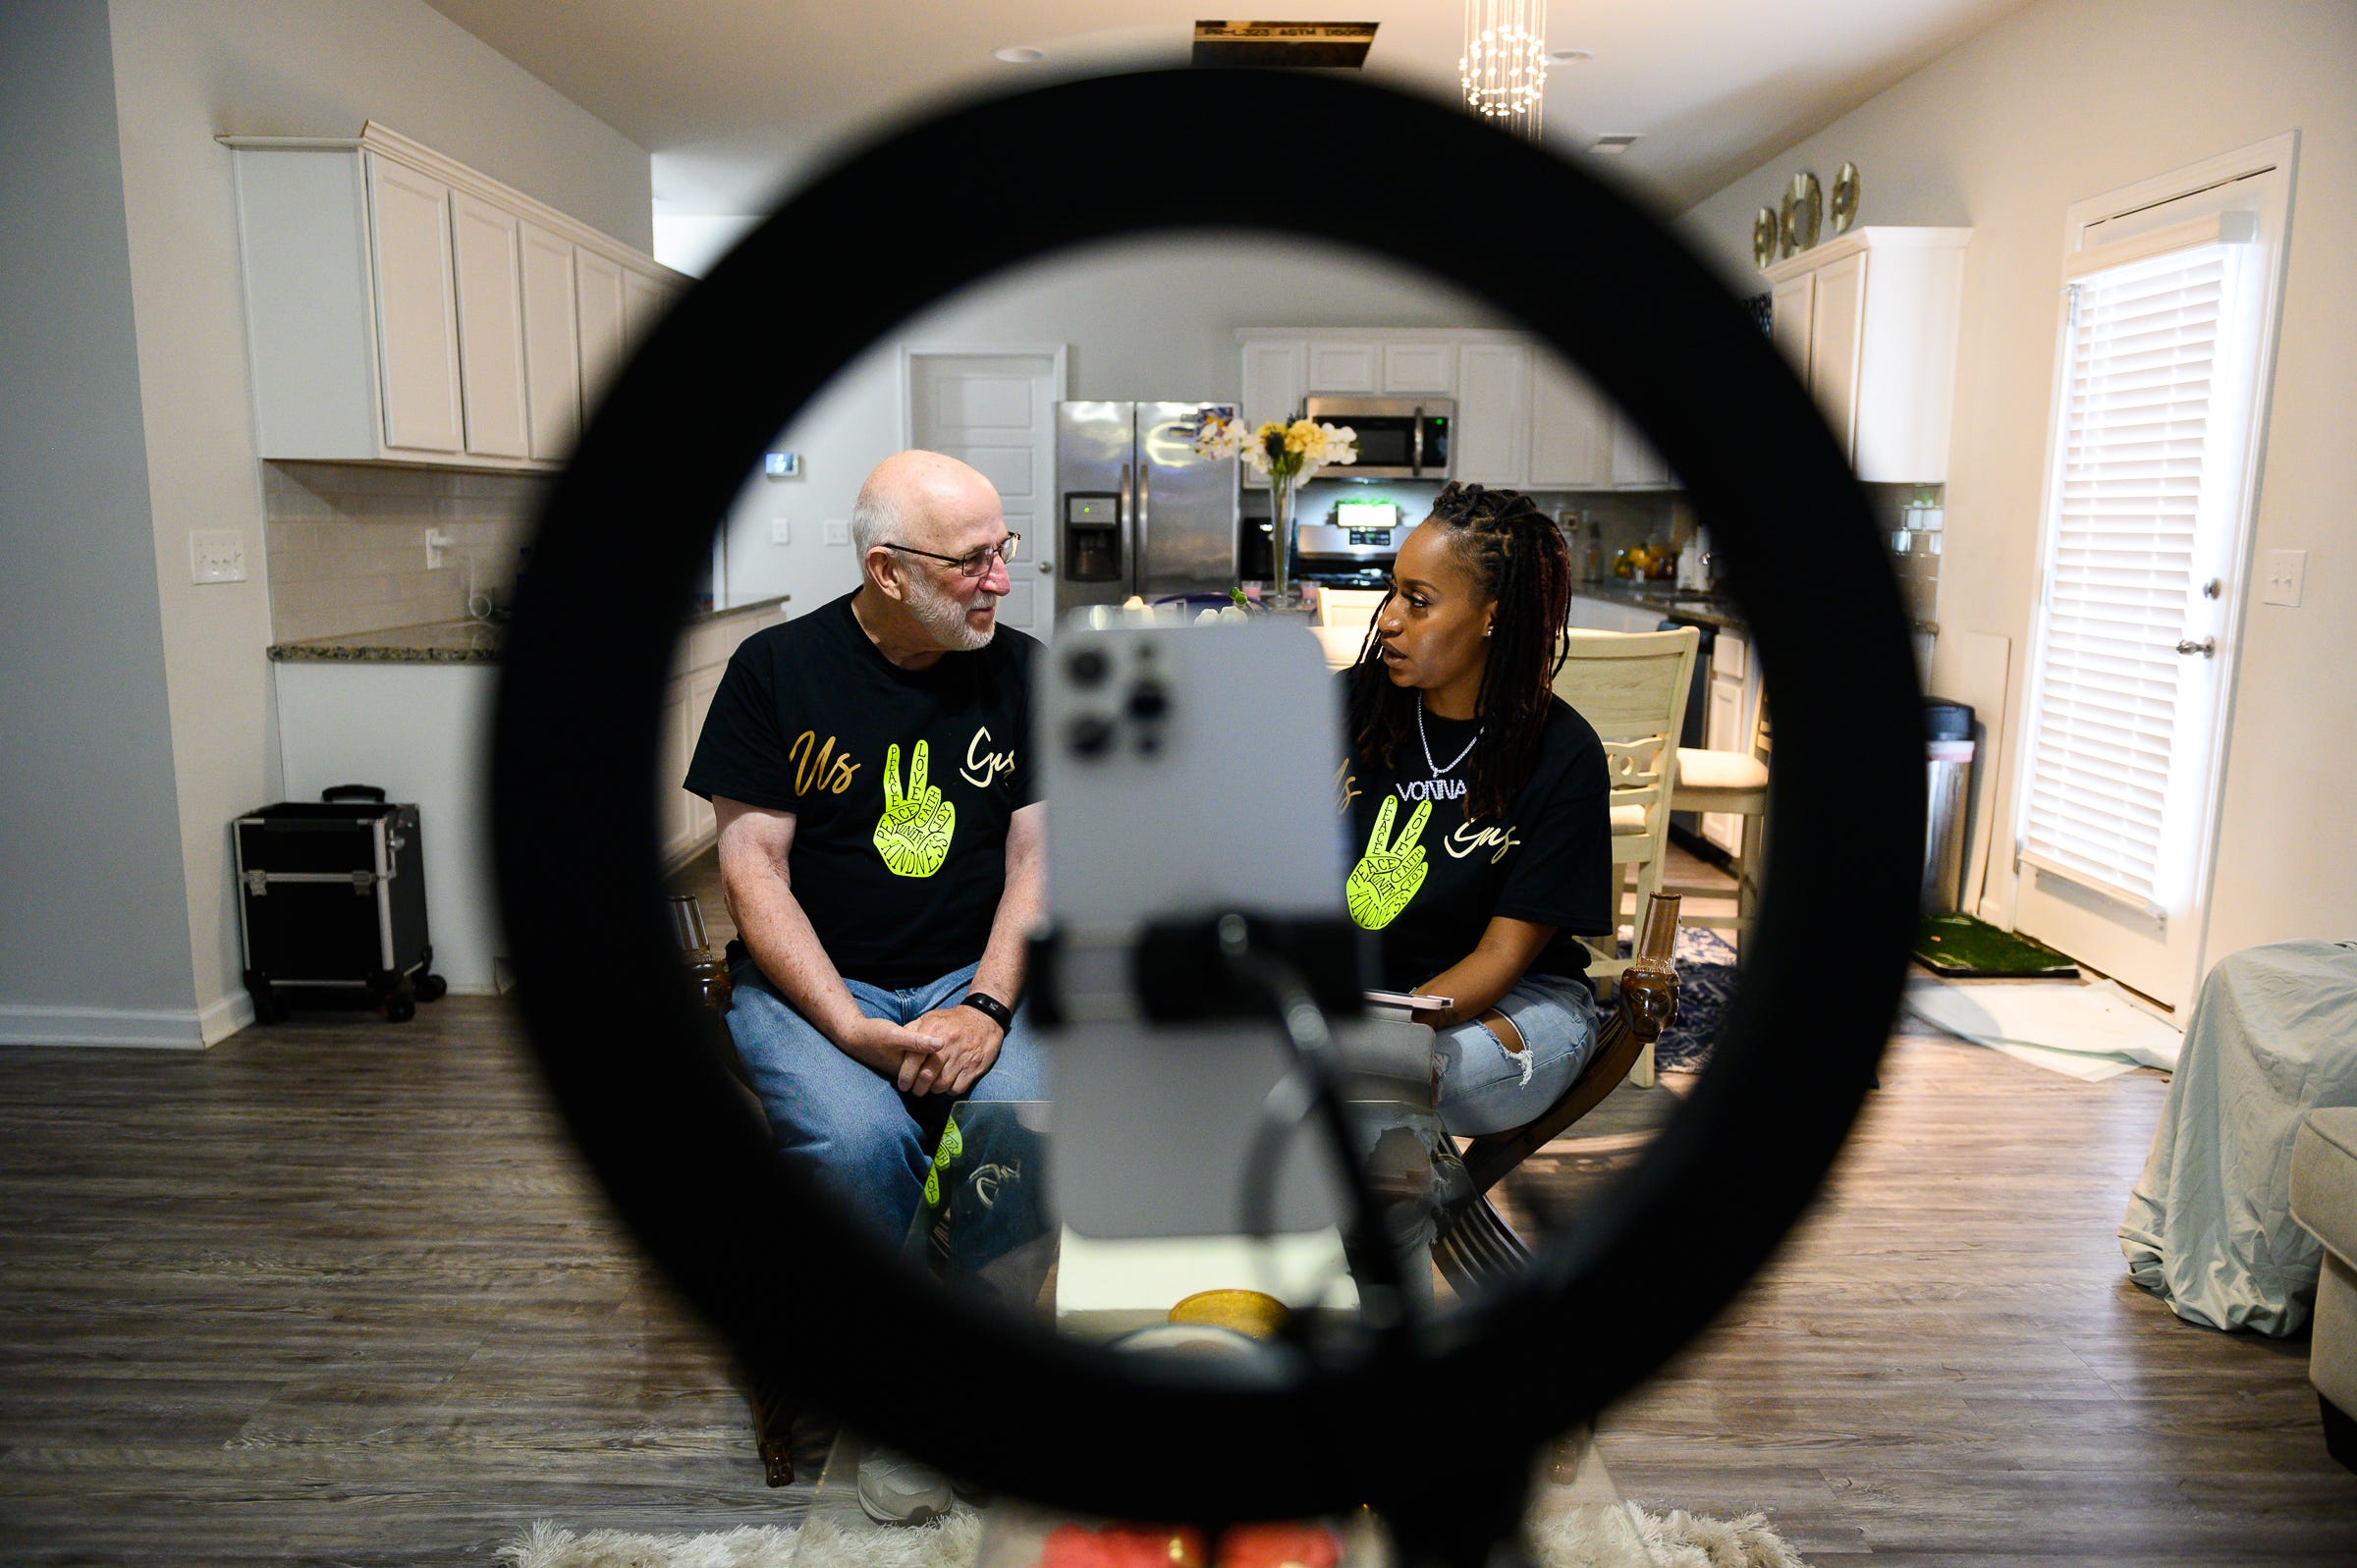 Lavonna Goodwin and Gus Philpott talk while doing a Facebook Live for their weekly "Us and Gus" video in Goodwin's Columbia area home.